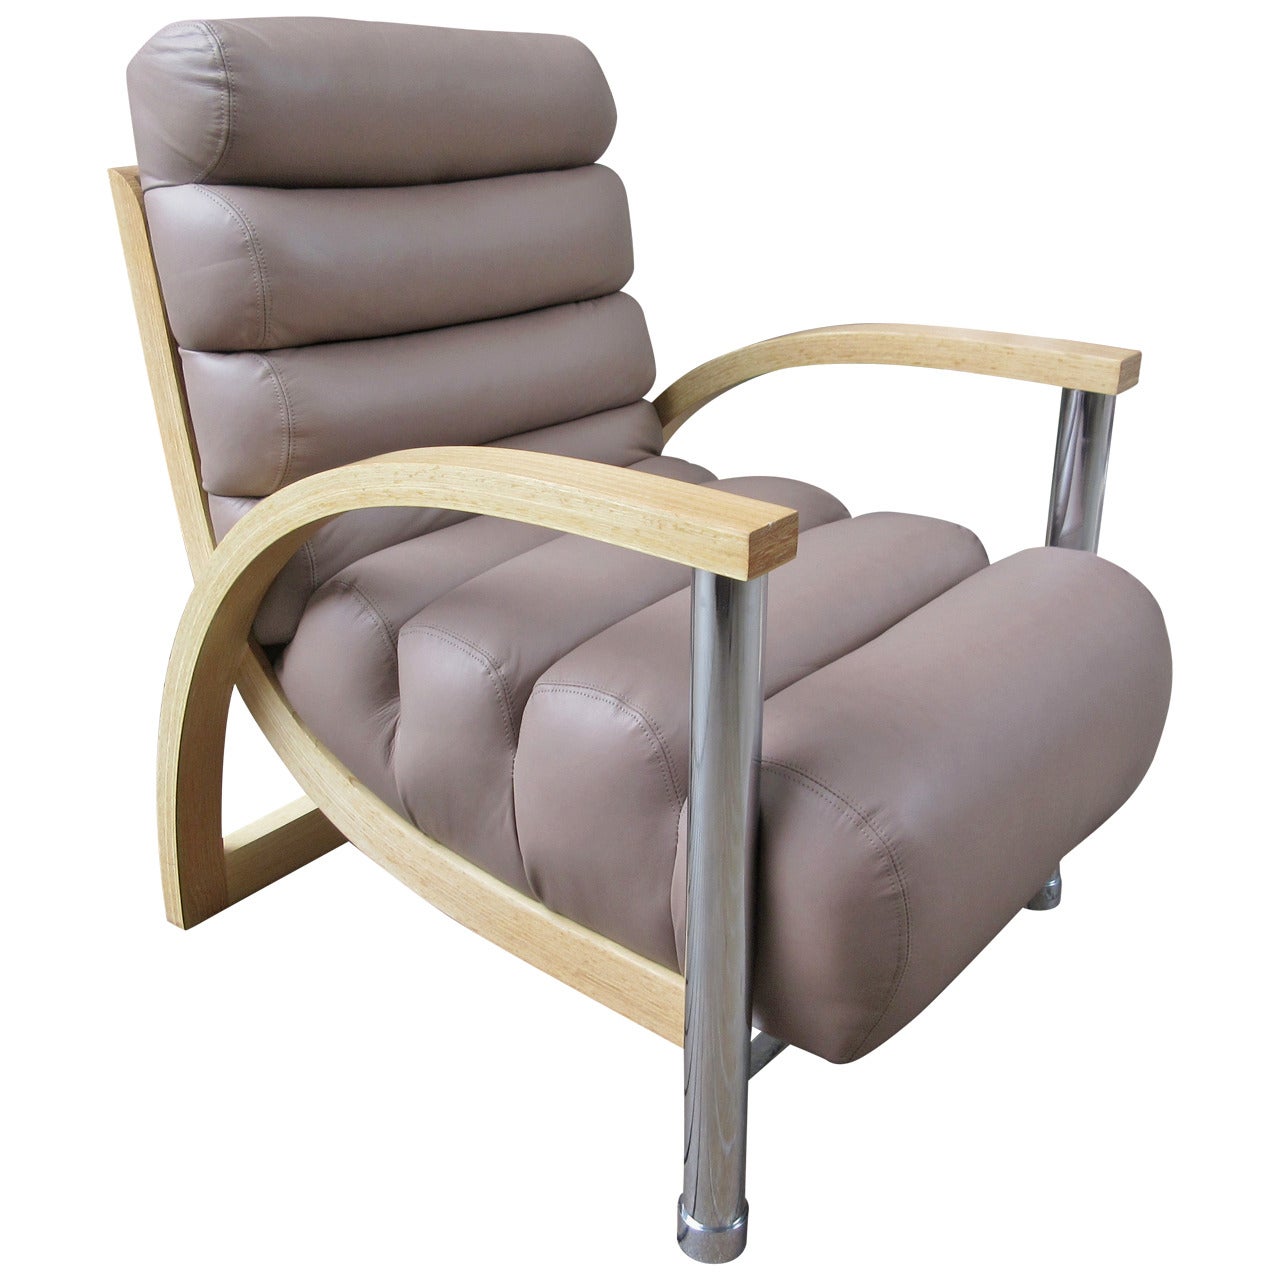 Jay Spectre Elipse Lounge Chair for Century